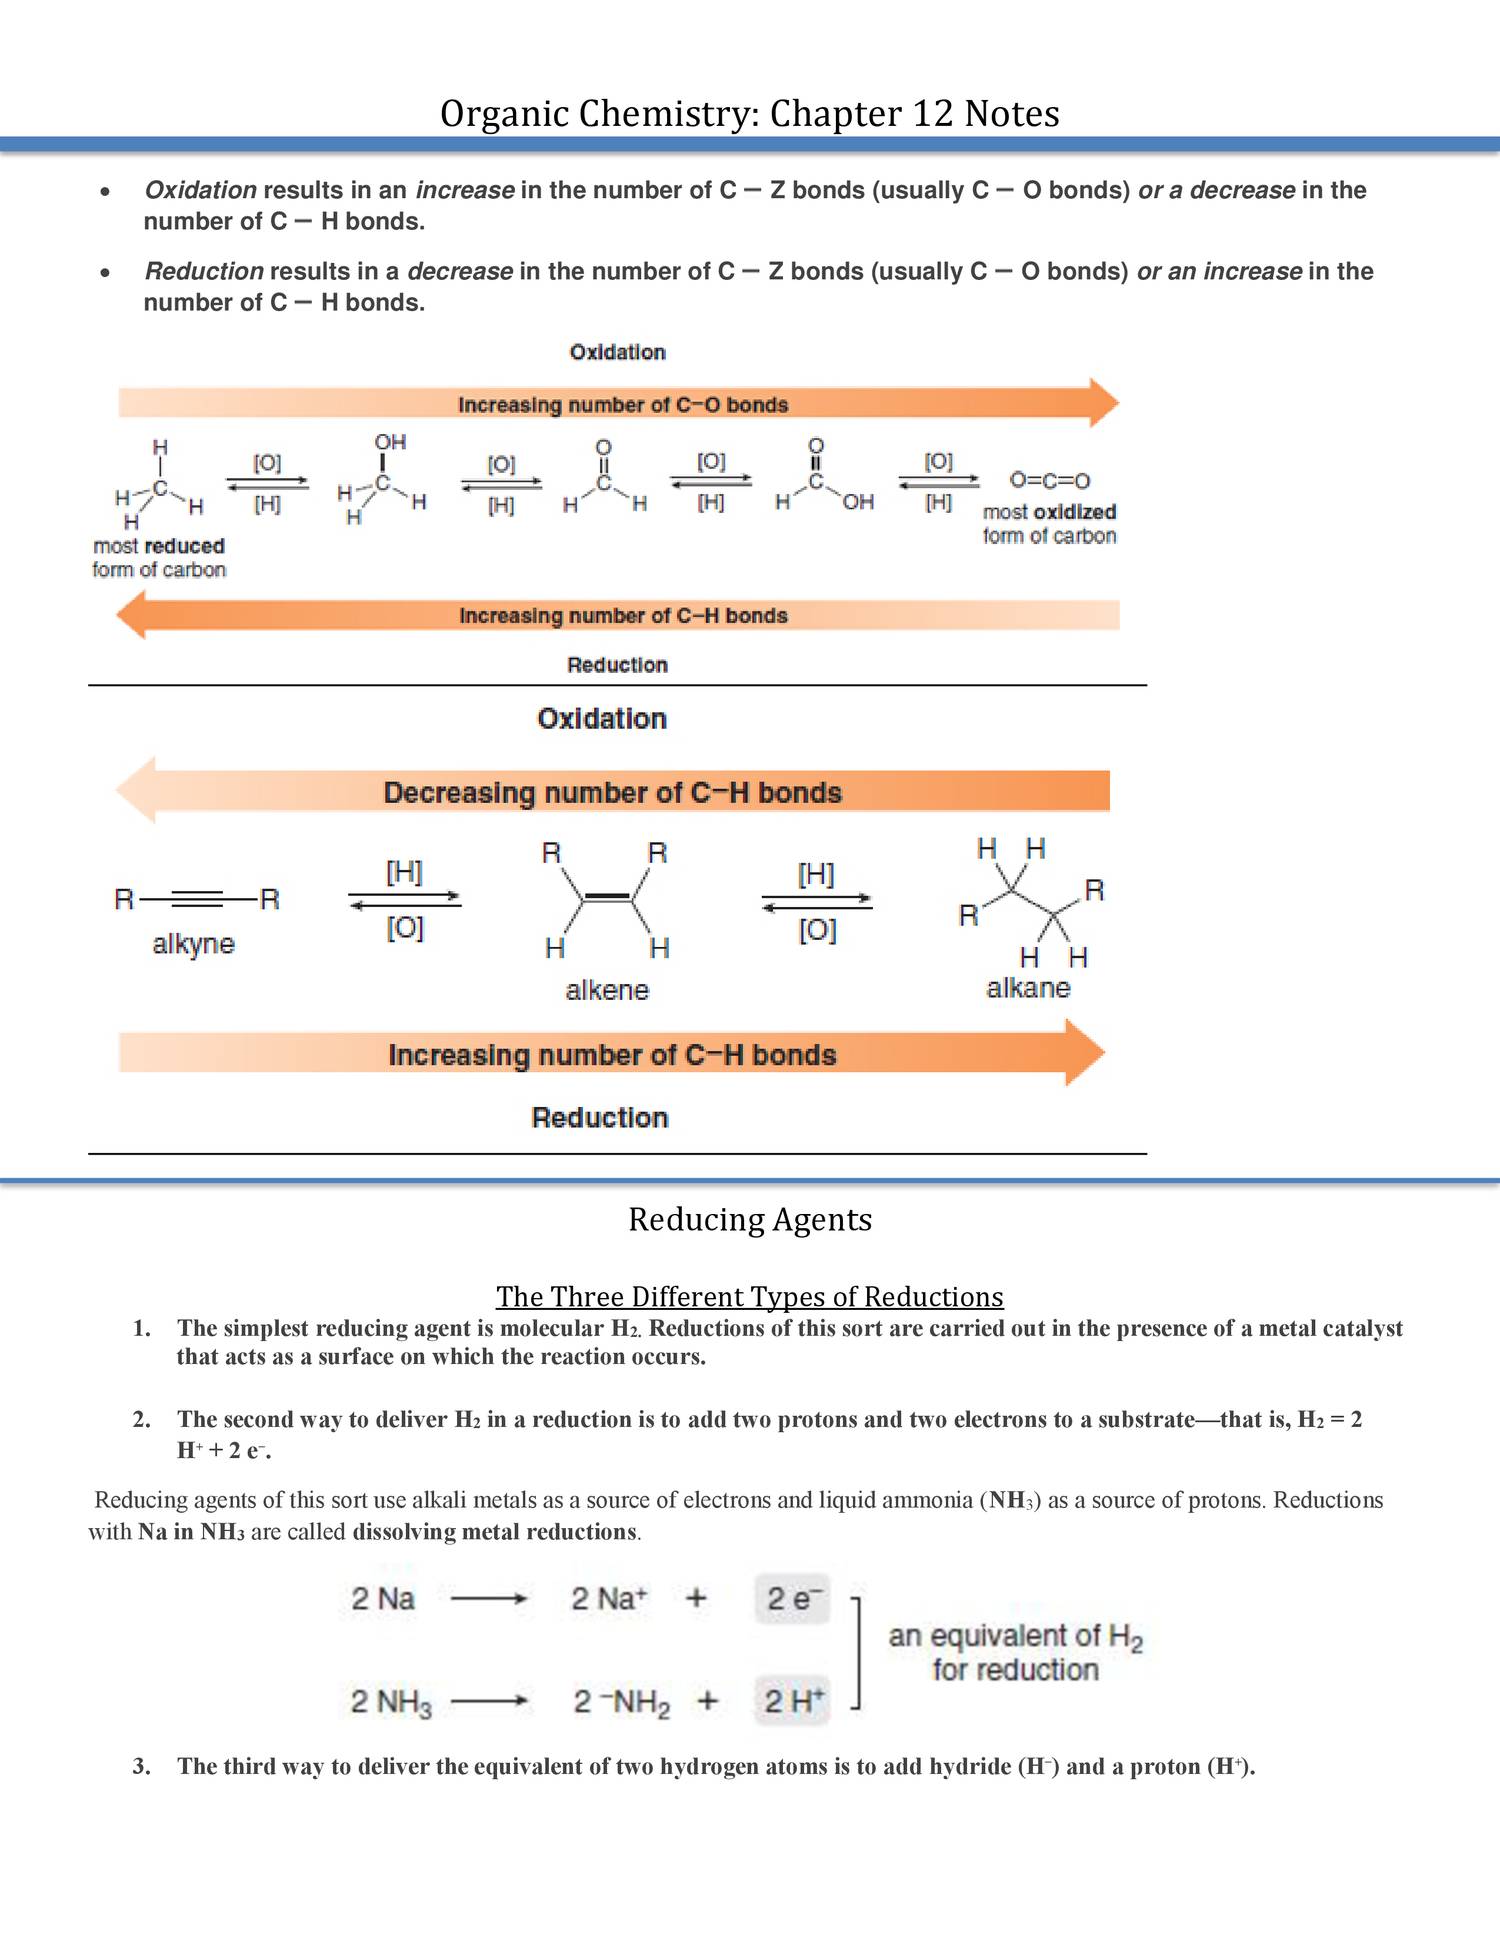 Organic Chemistry Oxidation And Reduction Reaction Notesdocx Docdroid